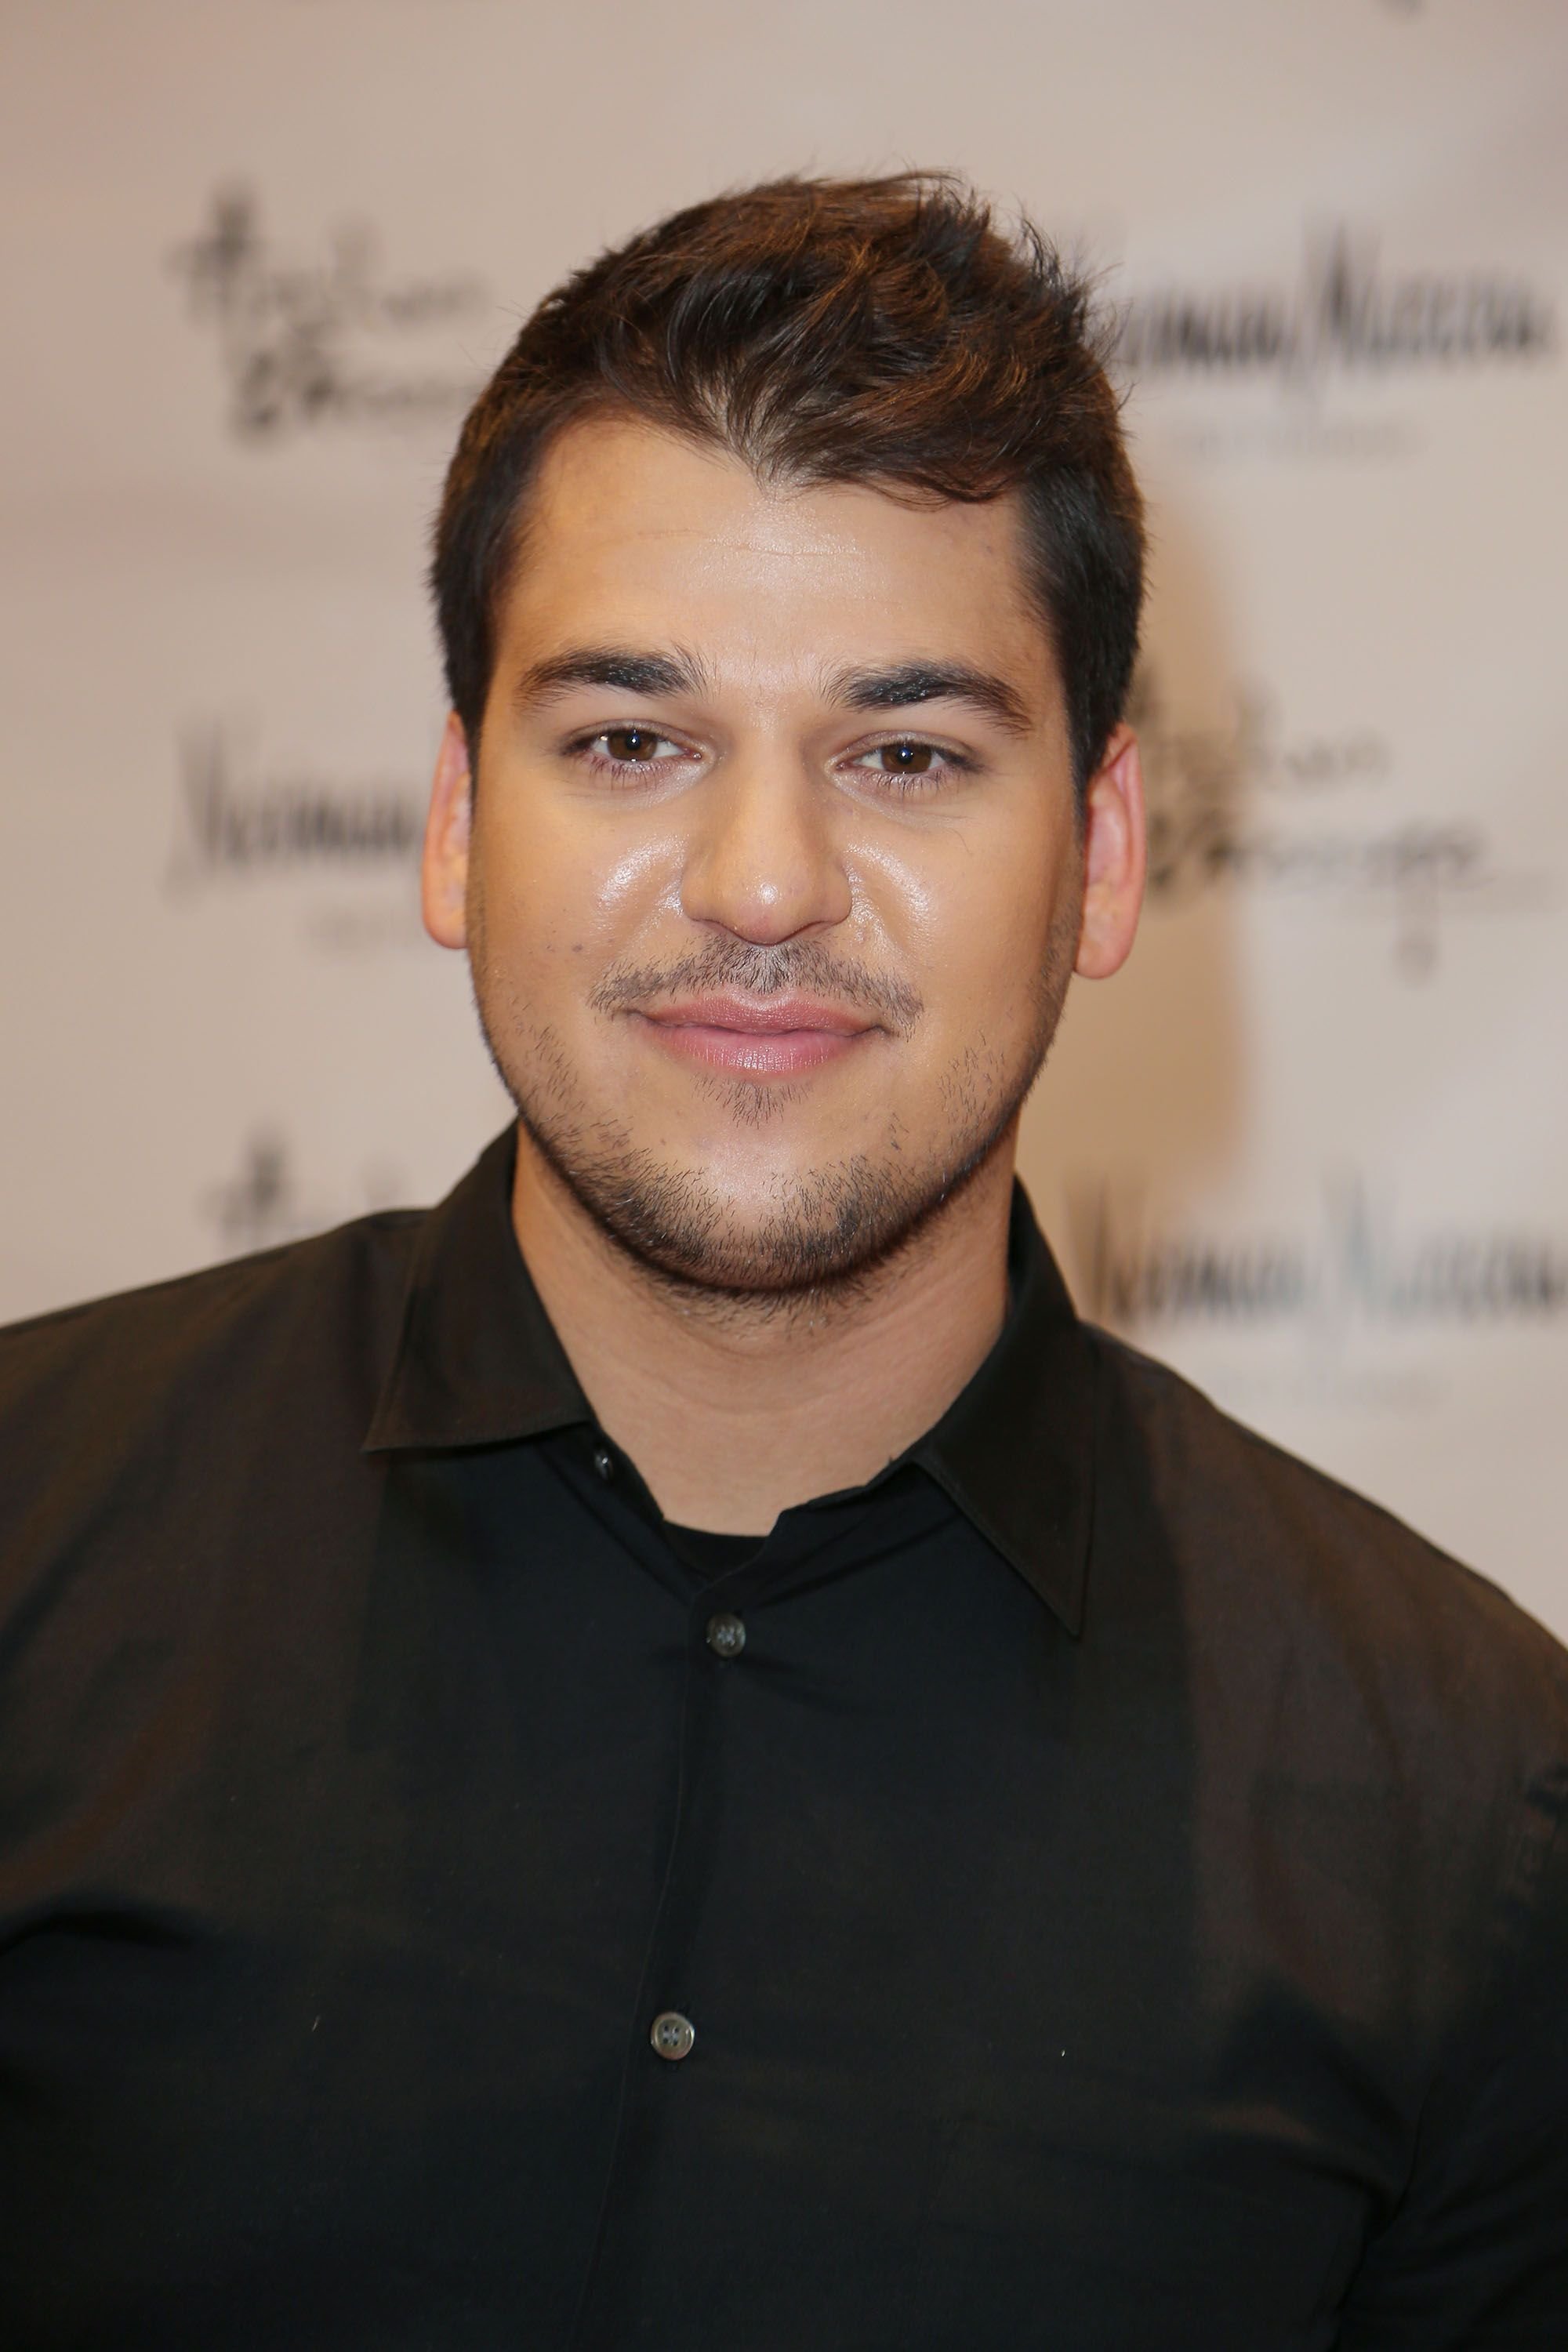 Rob Kardashian promoting his Arthur George Socks Collection at Neiman Marcus Bal Harbour at Neiman Marcus on December 10, 2012 in Miami Beach, Florida. | Source: Getty Images